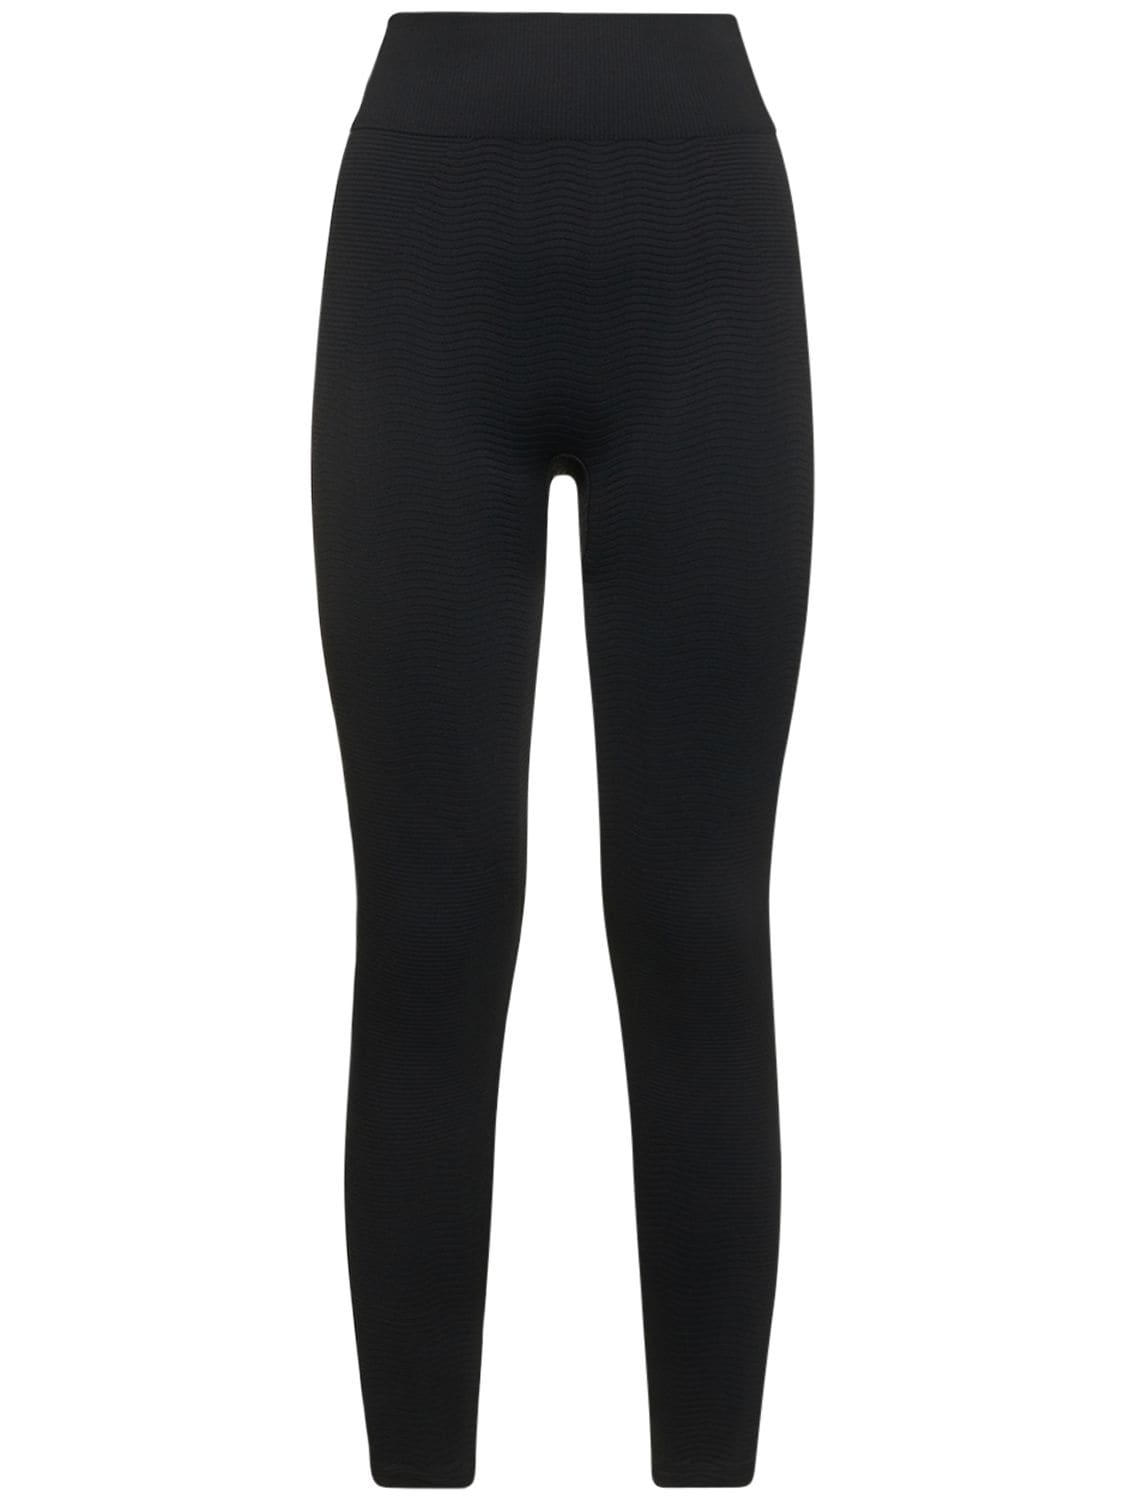 WOLFORD THE W WELLNESS SMOOTHING LEGGINGS